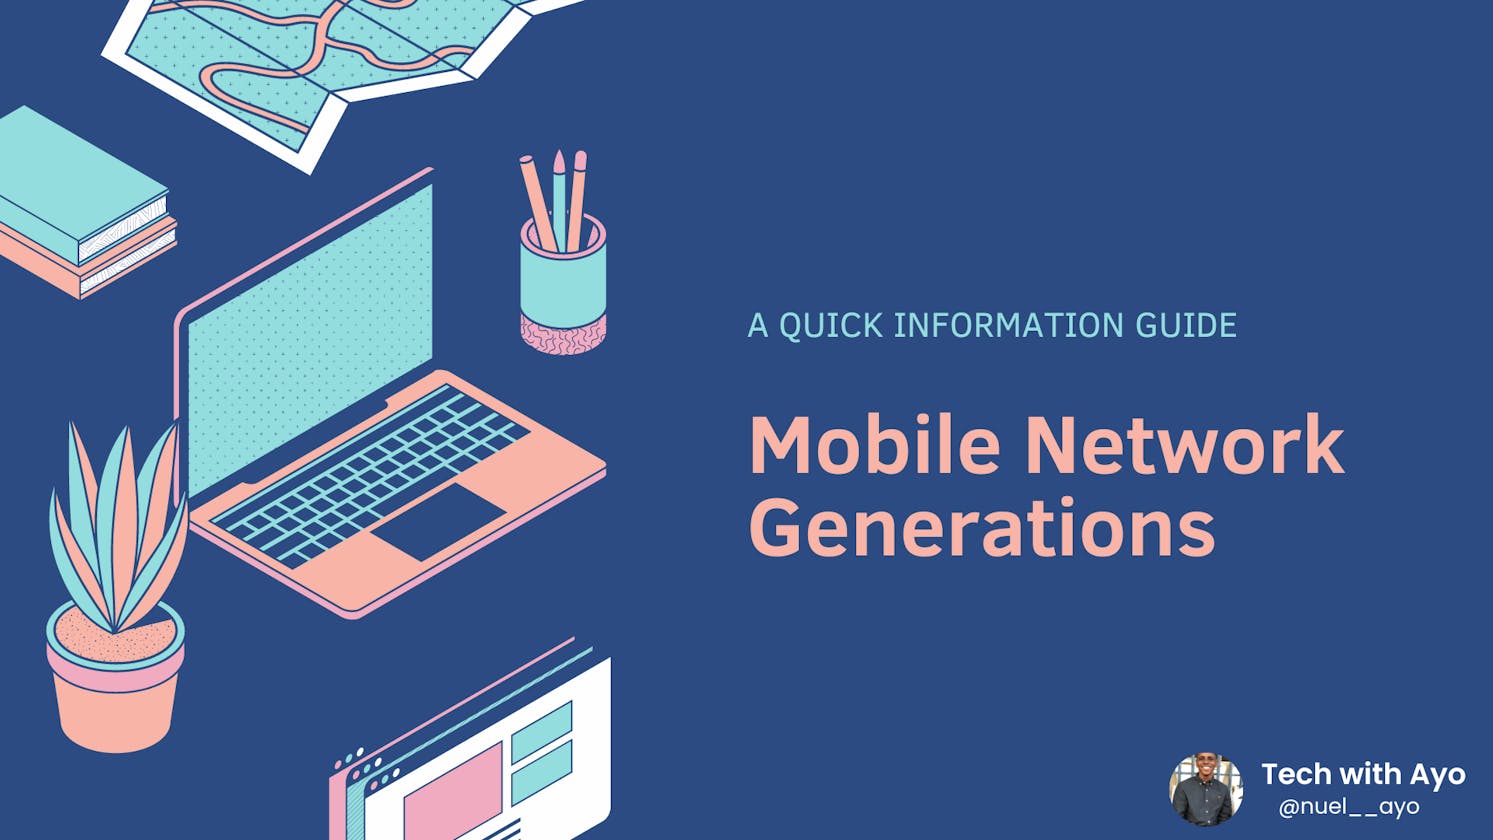 A Quick Intro to the Generations of Mobile Networks